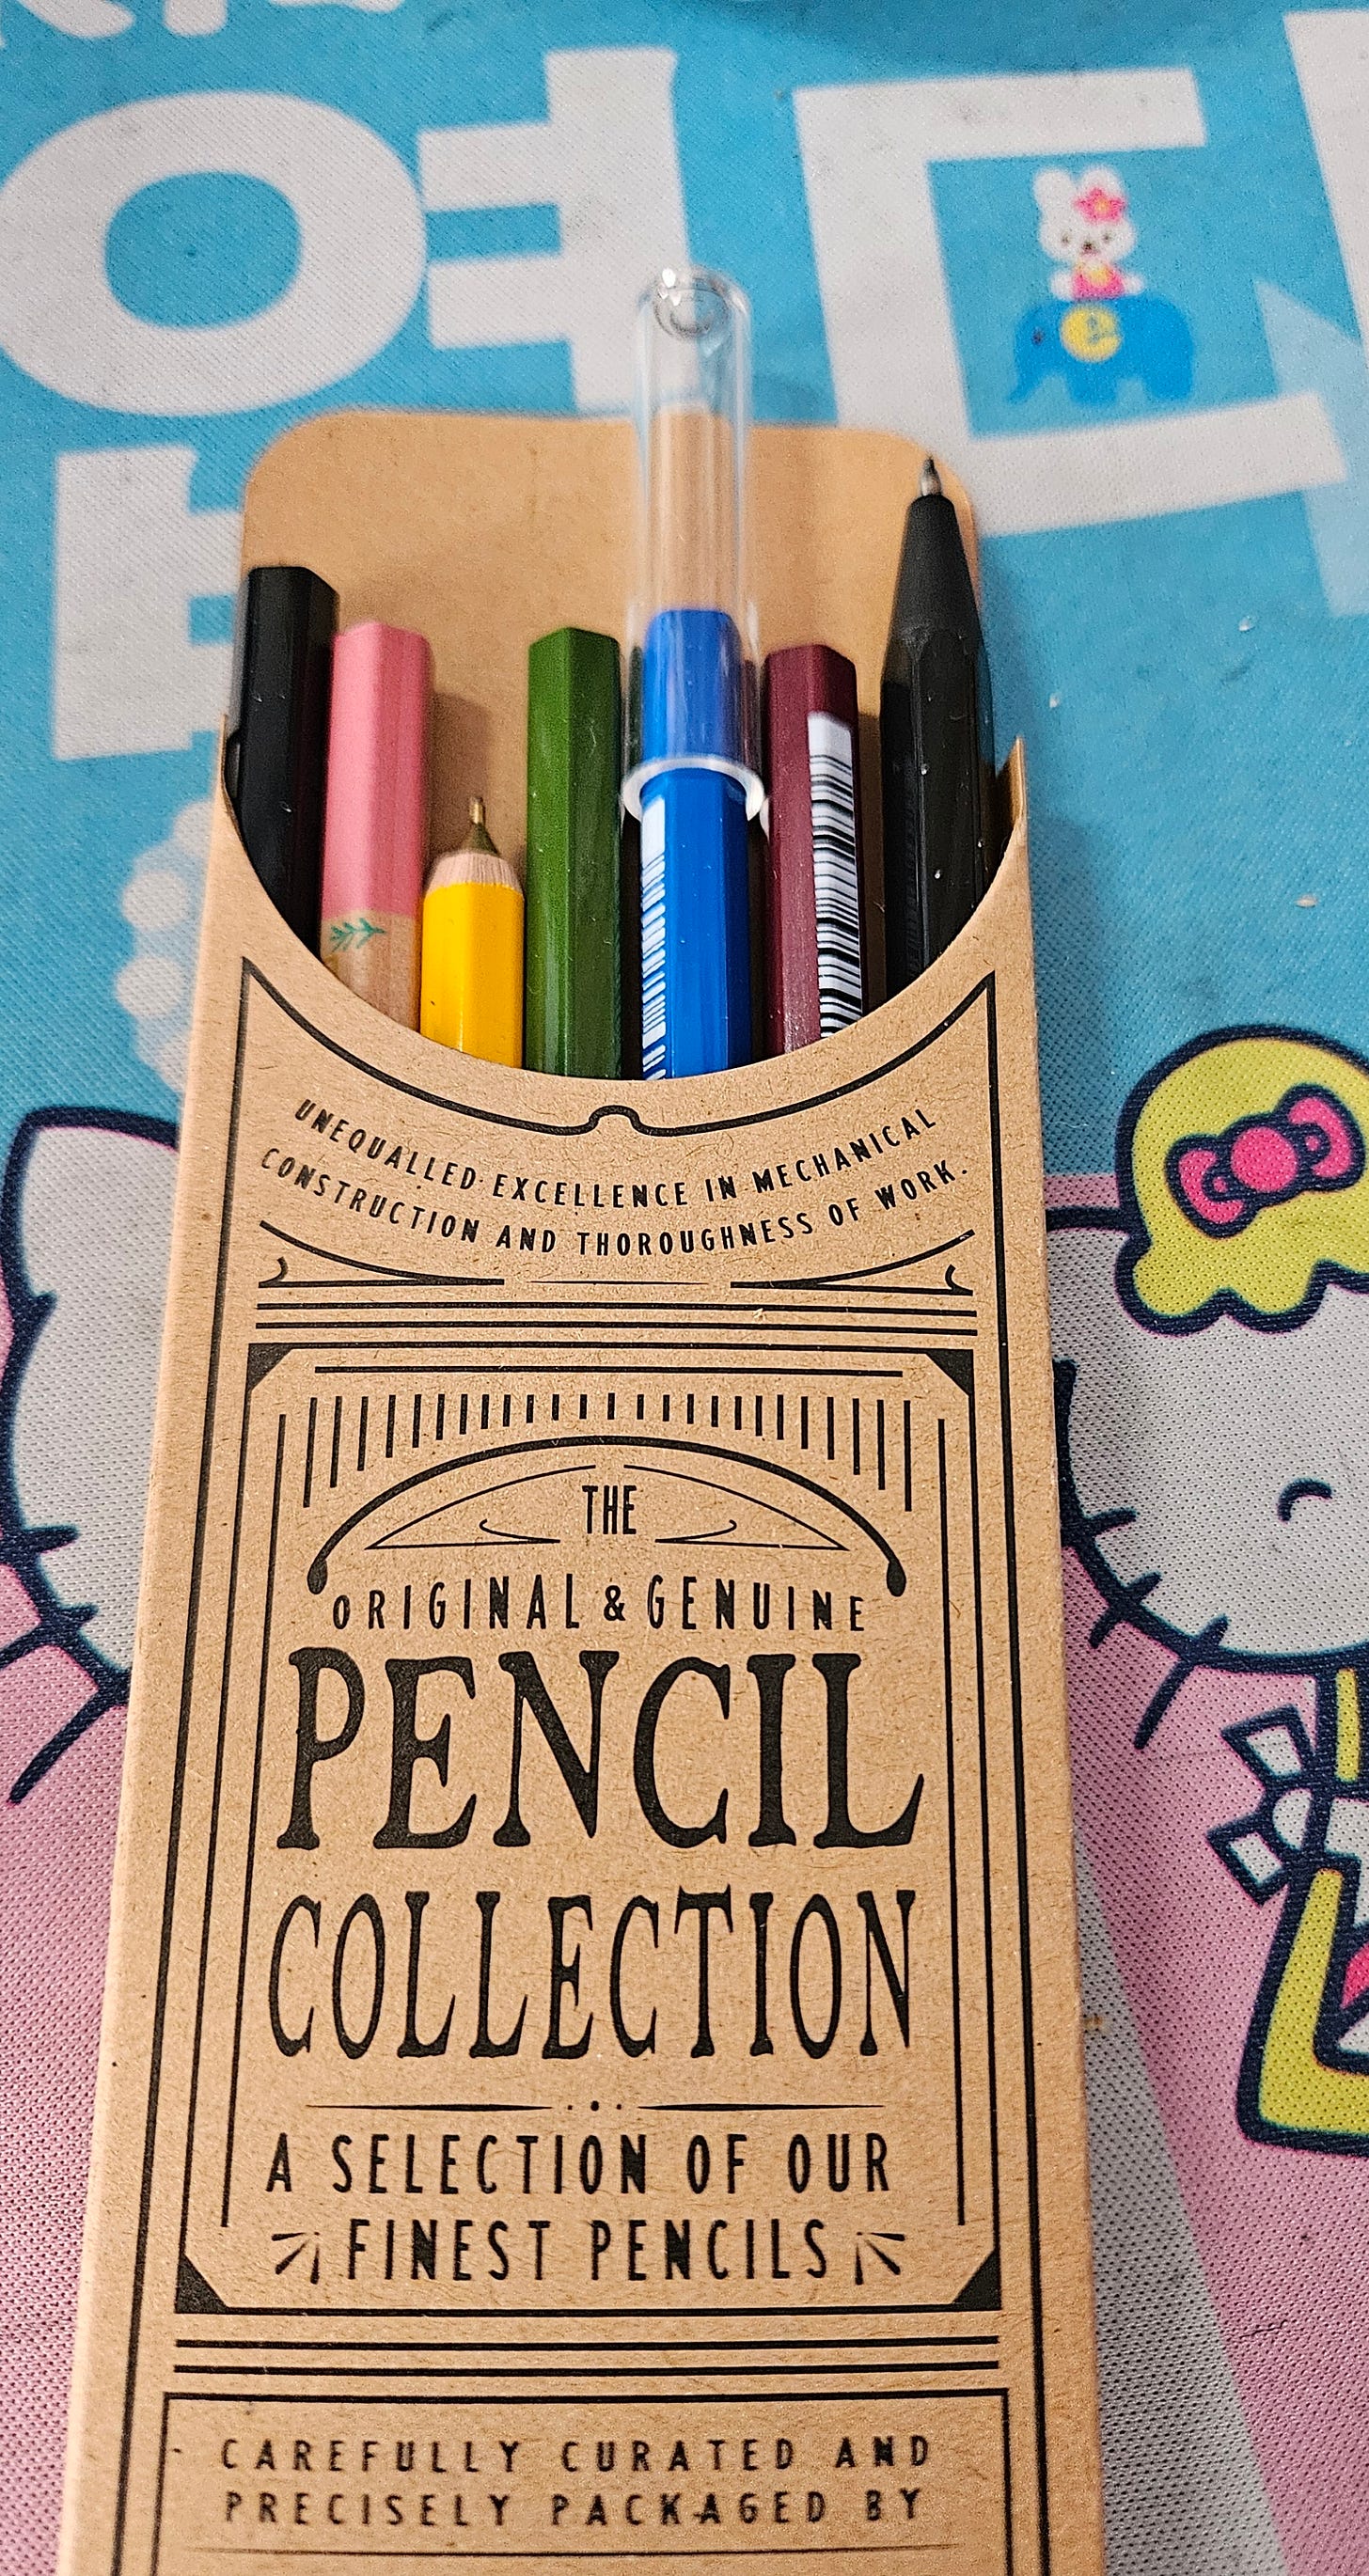 Collection of pencils in a paper case